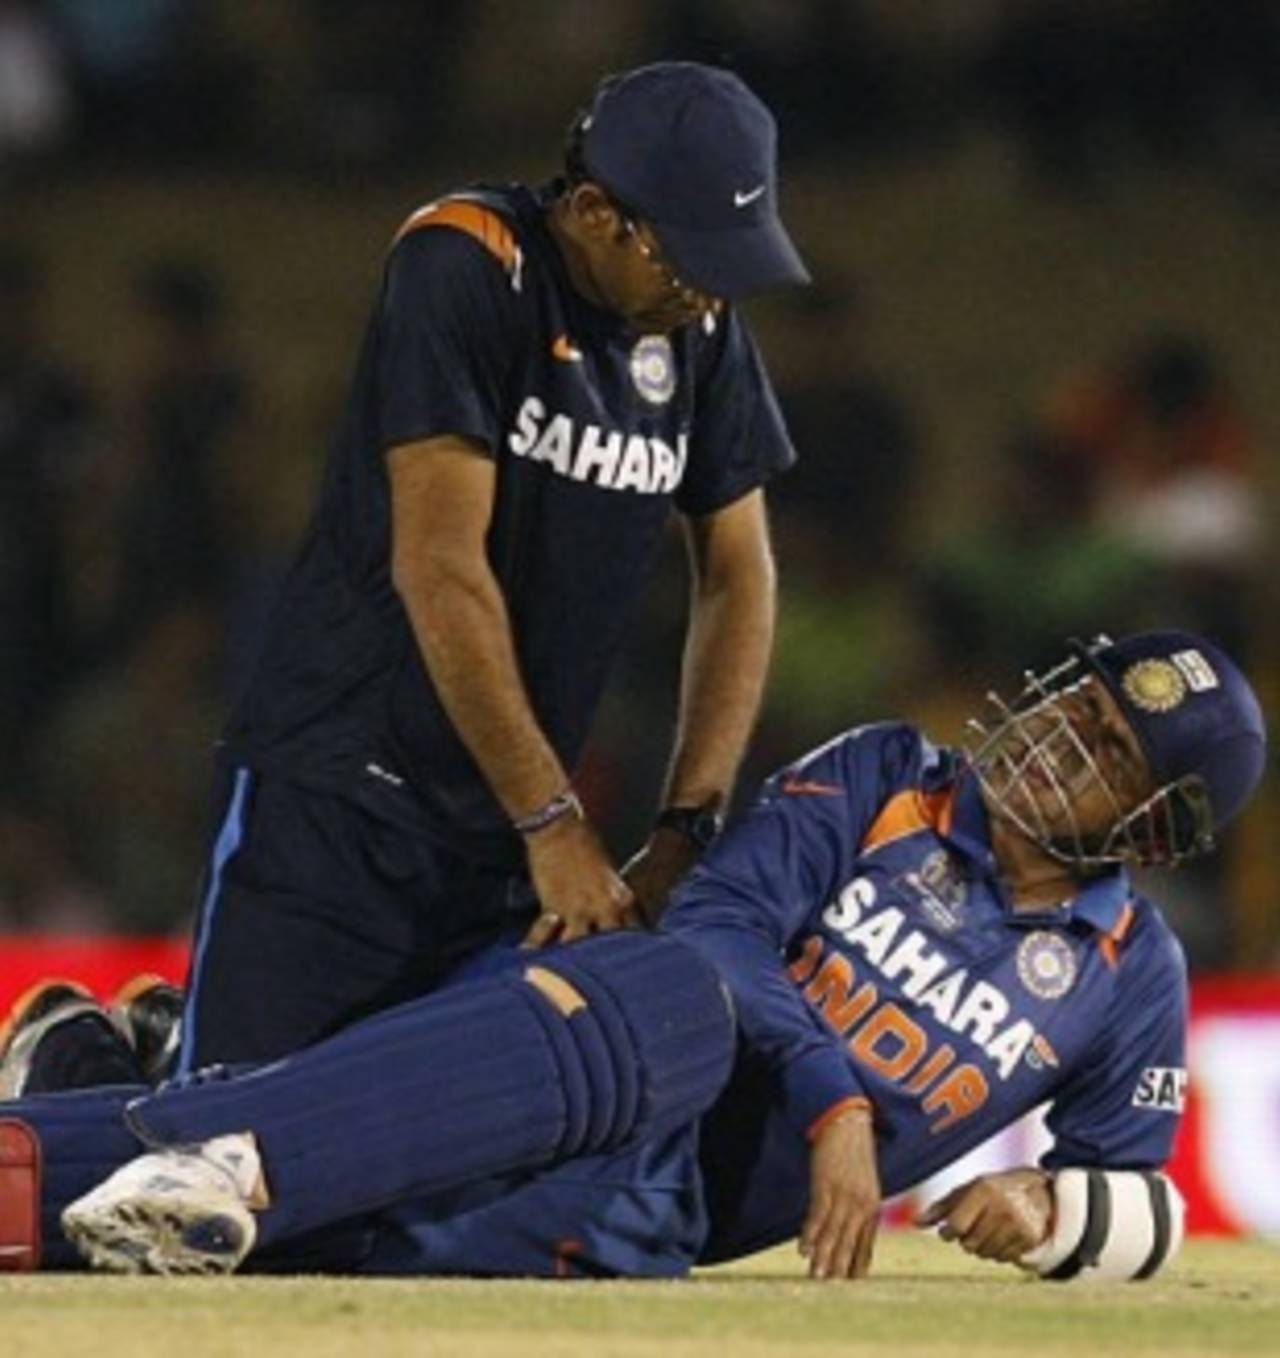 Virender Sehwag suffered from a hip problem, India v Pakistan, 4th ODI, Asia Cup, Dambulla